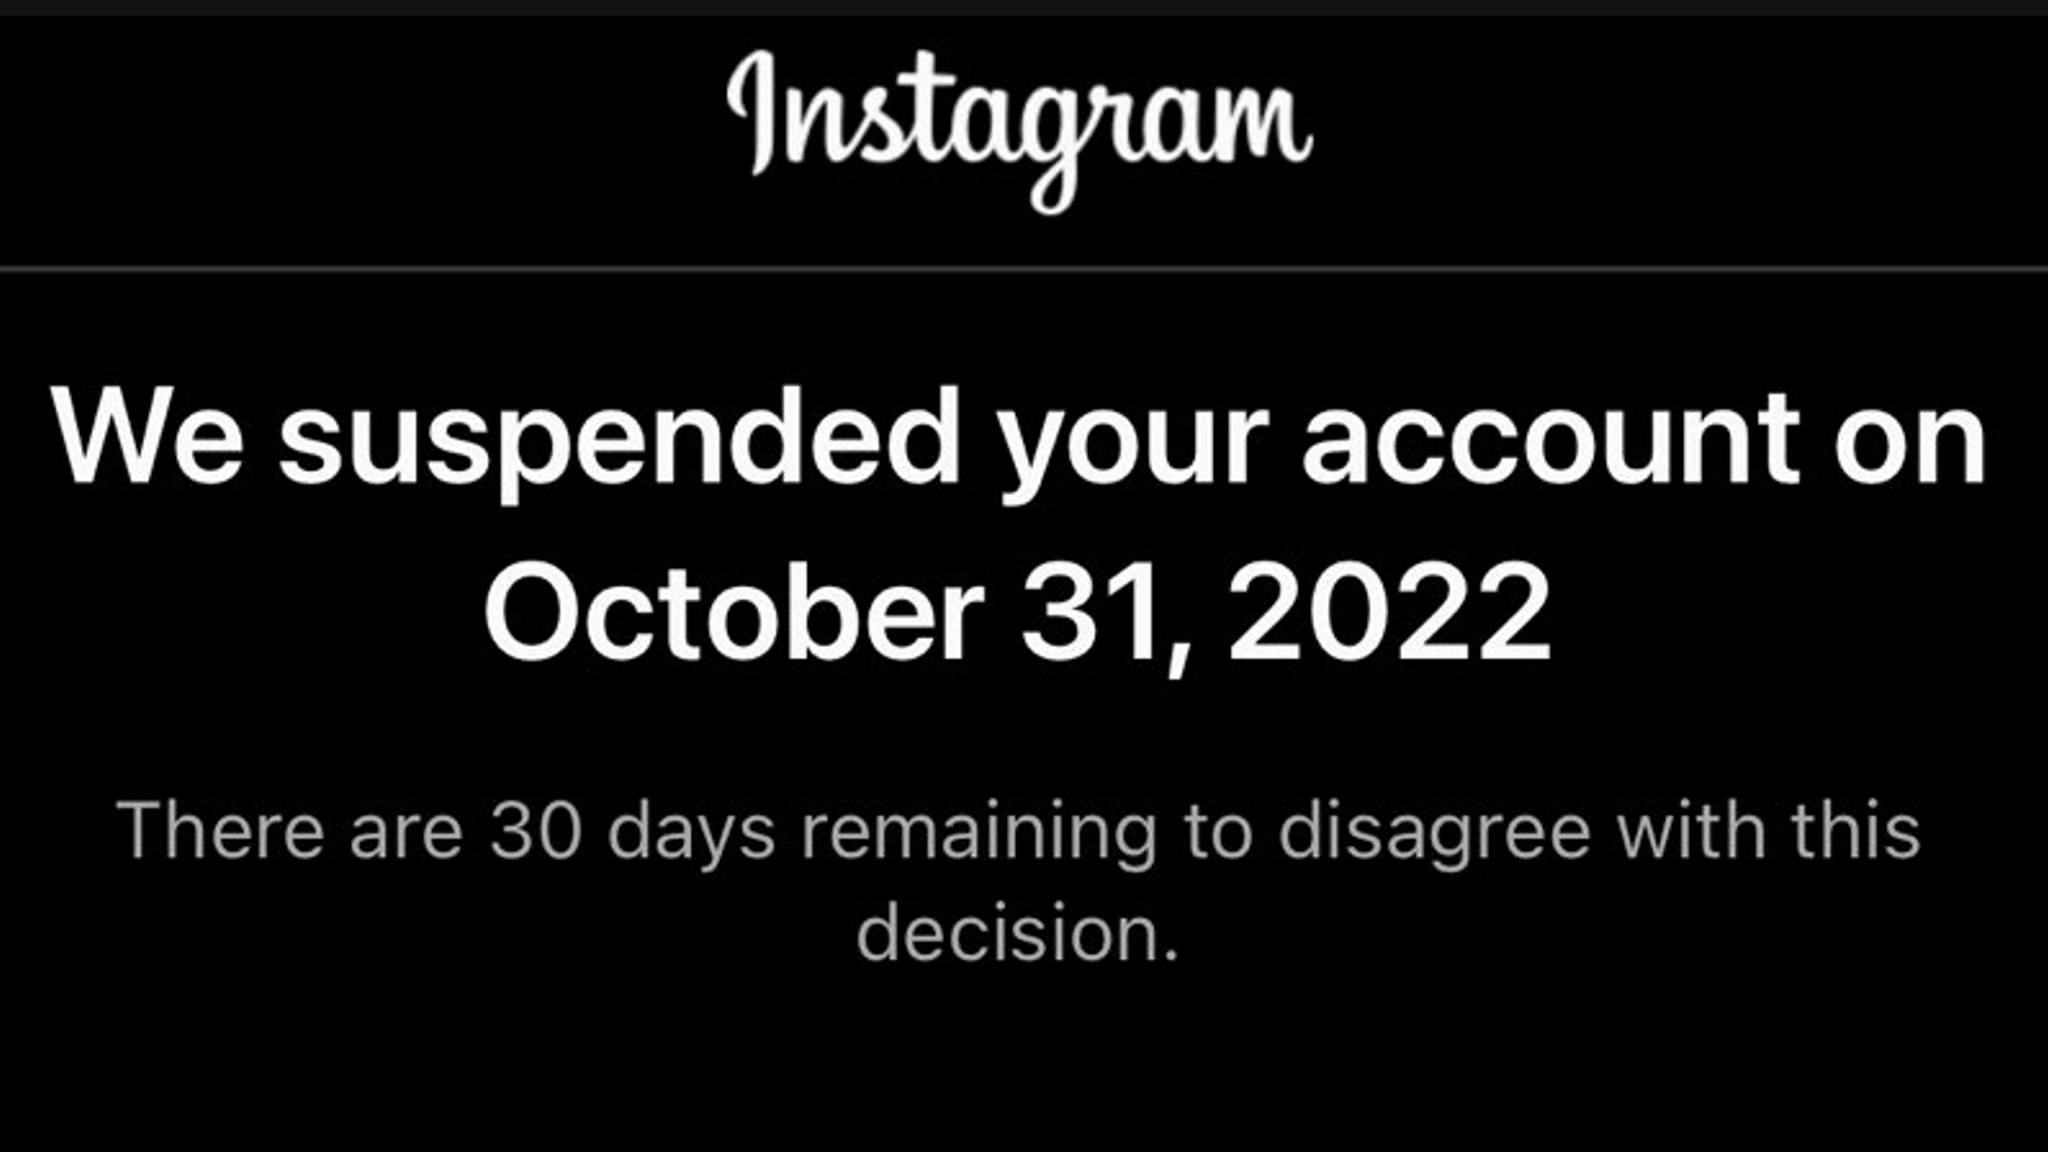 Instagram outage: Accounts suspended in mass numbers